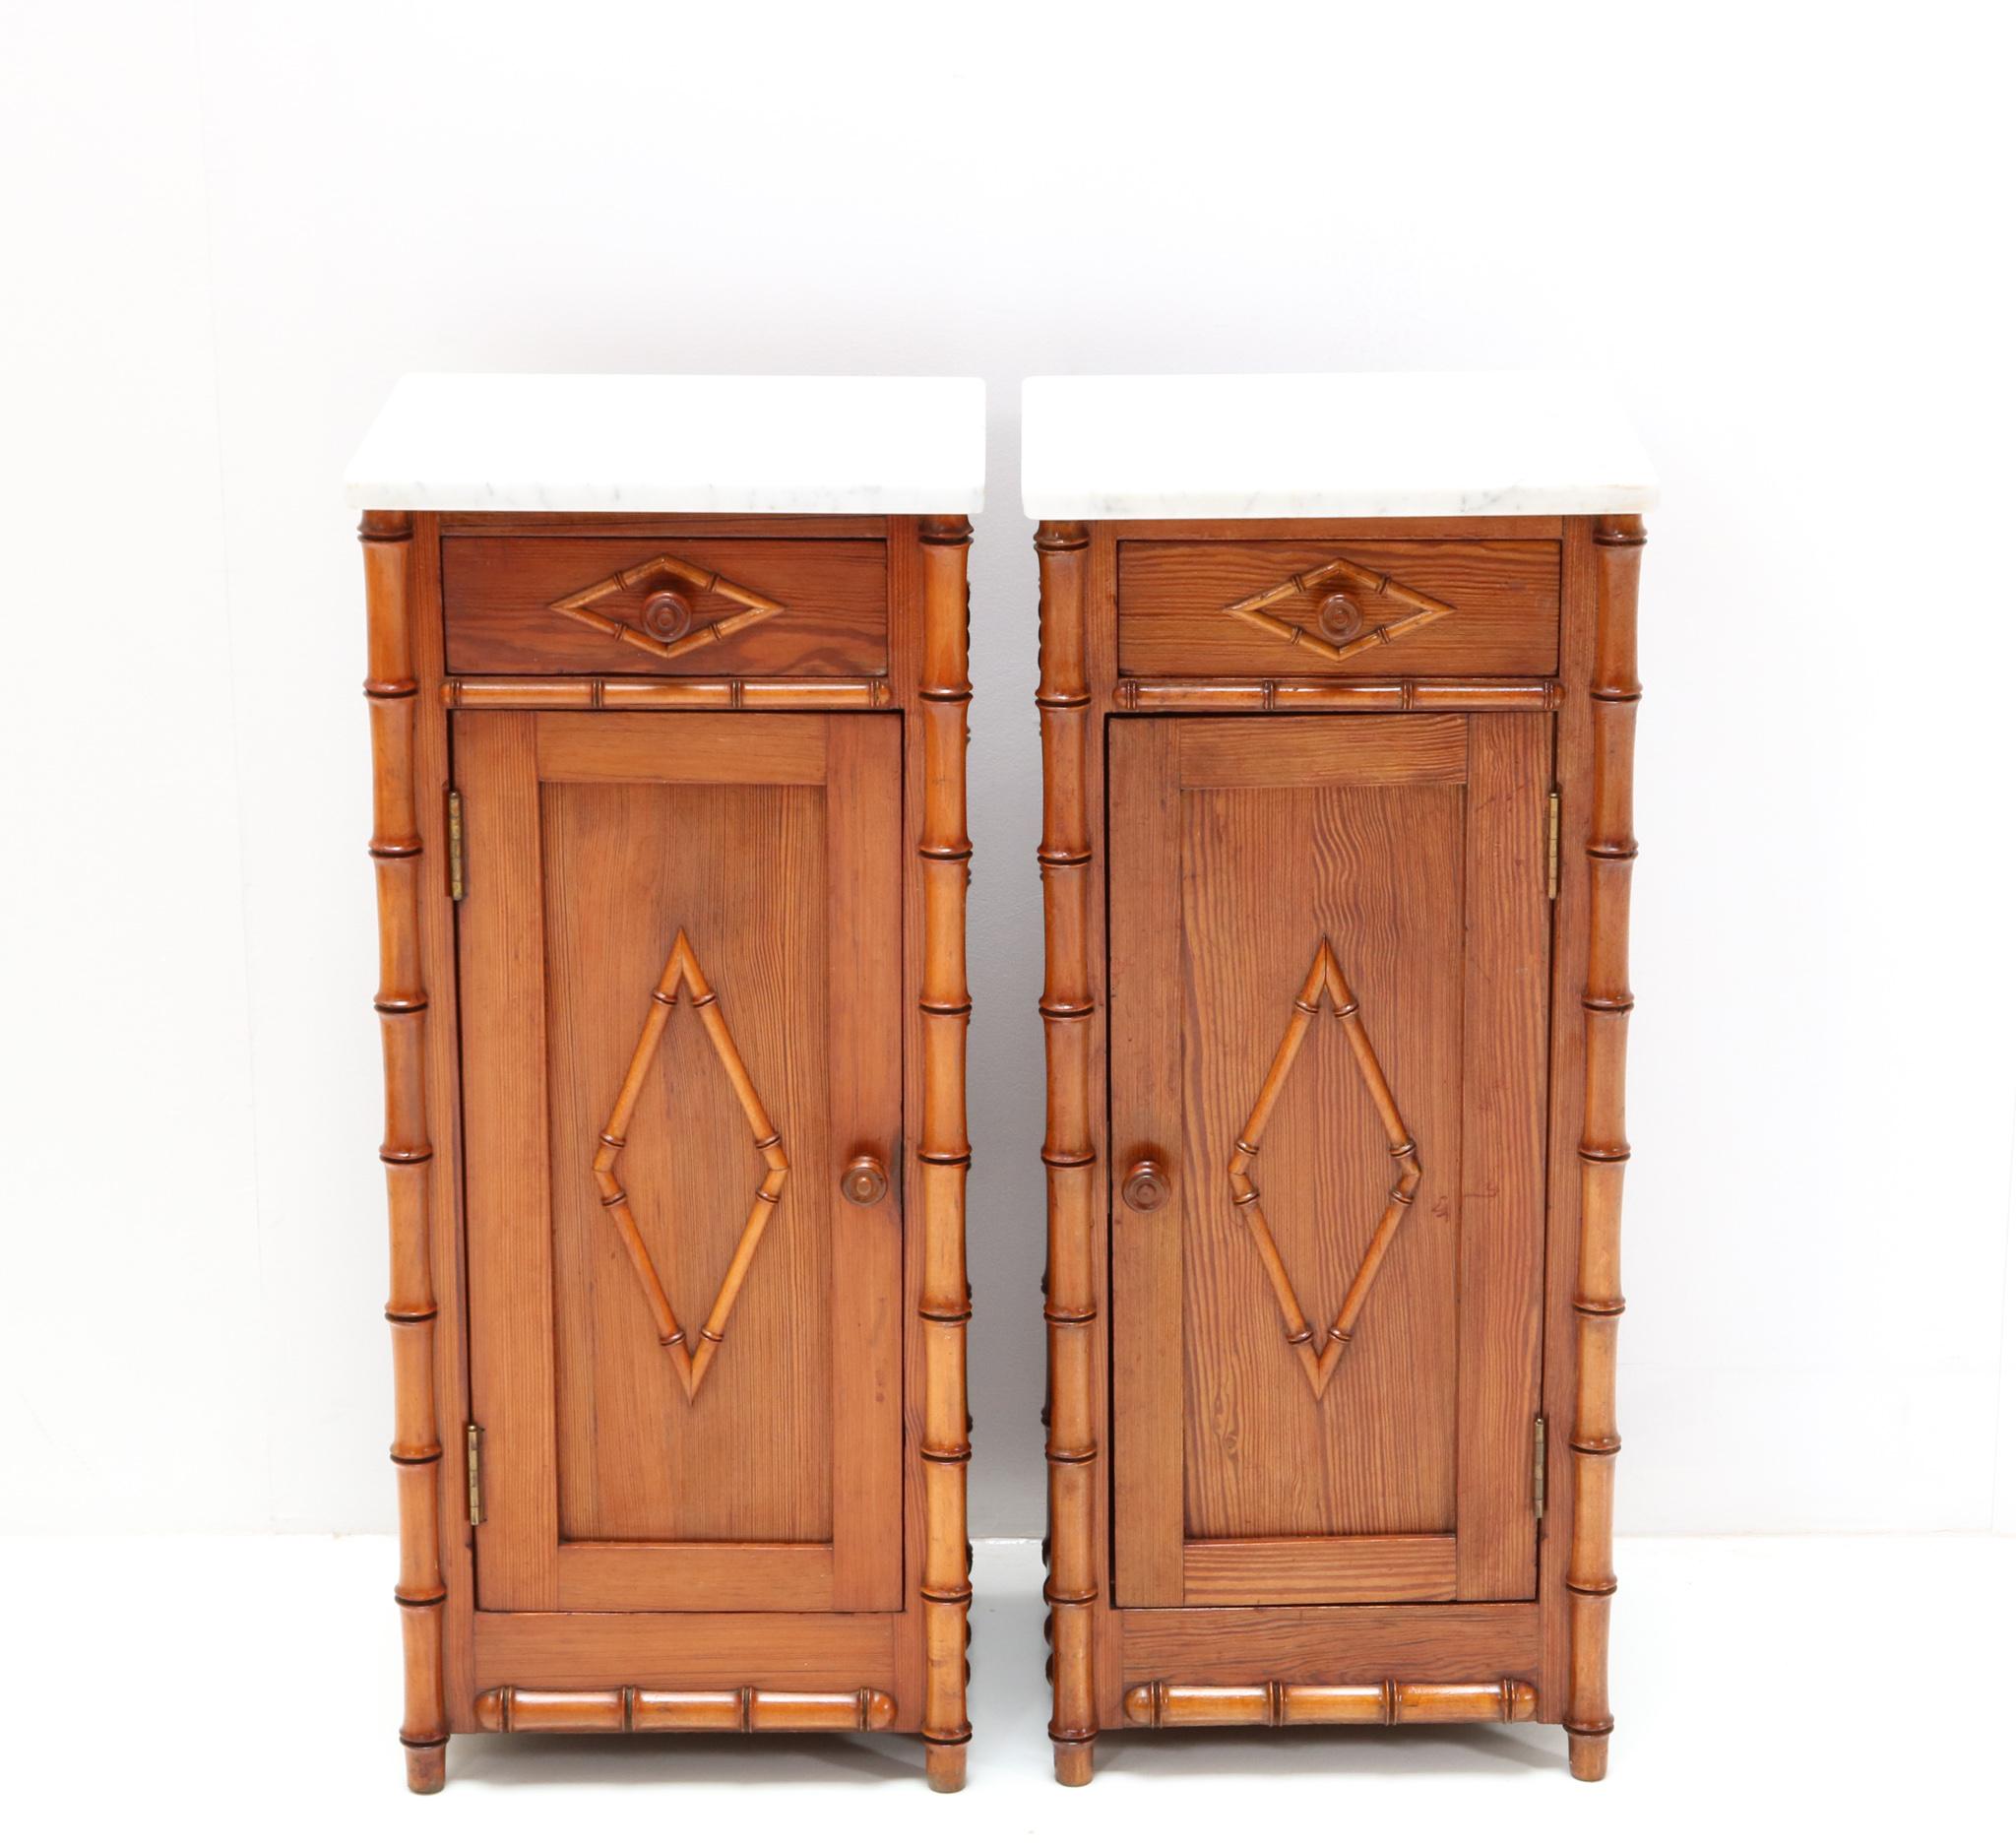 Magnificent and rare pair of Art Nouveau nightstands or bedside tables.
Striking French design from the 1900s.
Solid pine faux bamboo with original white marble tops.
This wonderful Art Nouveau set of nightstands or bedside tables is in very good